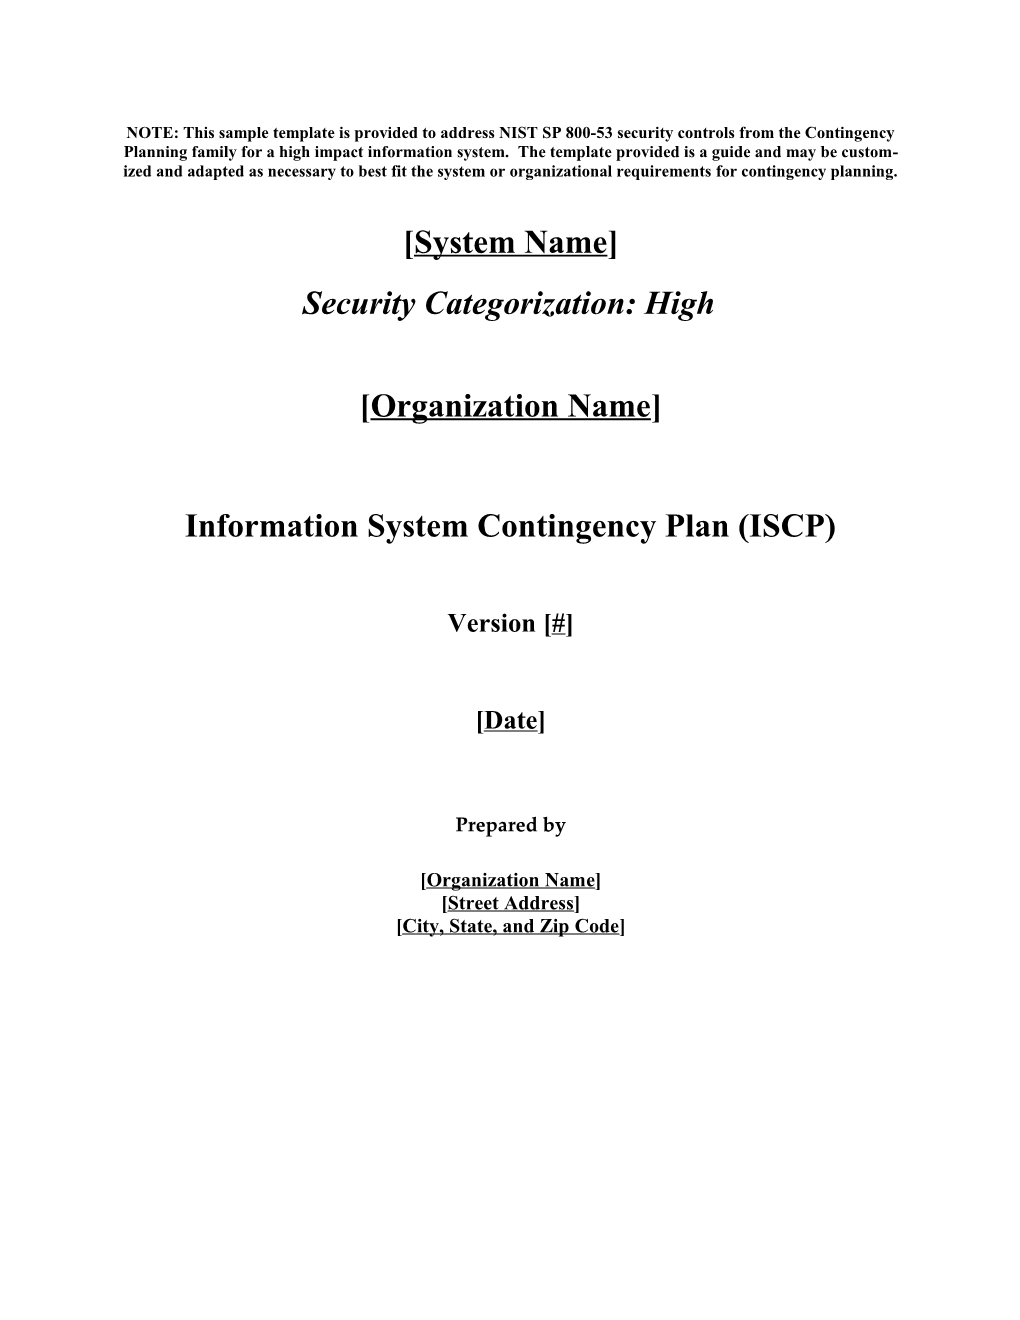 Information System Contingency Plan (ISCP)